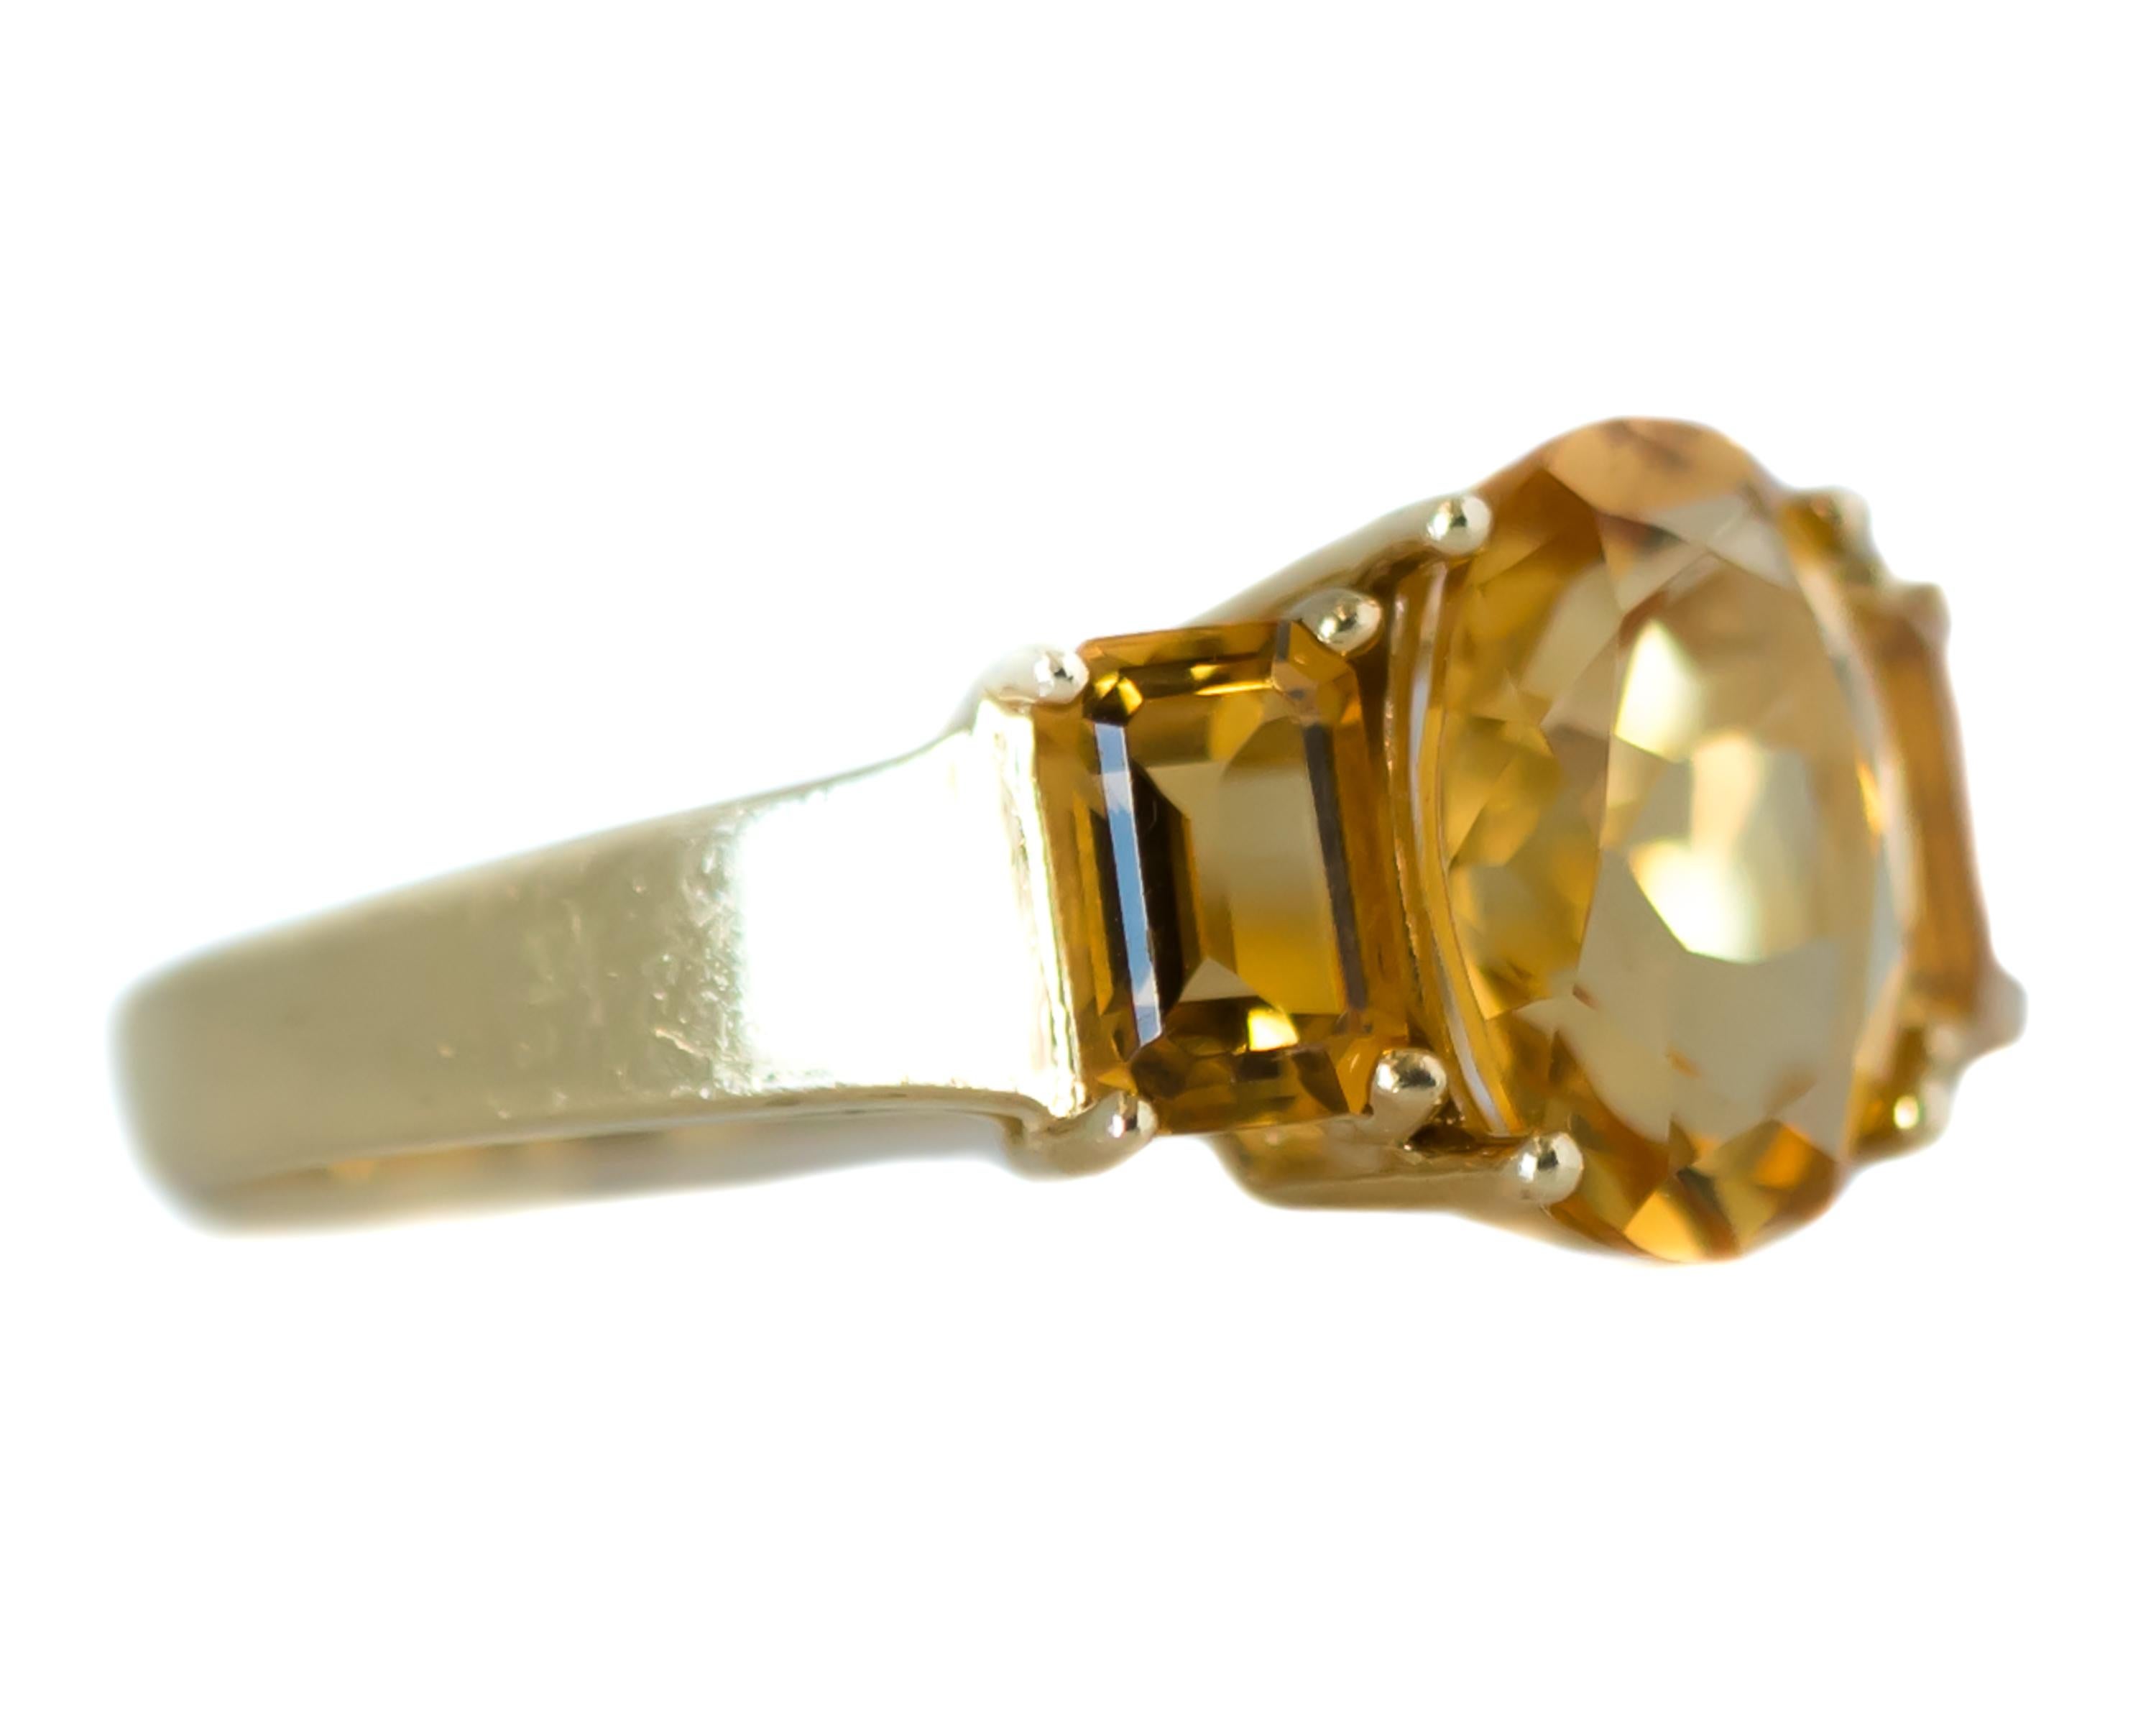 1980s Three-Stone Citrine Ring - 14 Karat Yellow Gold, Citrine

Features: 
4.9 carat total Citrine
Oval cut Citrine center stone
Baguette cut Citrine side stones
14 Karat Yellow Gold Cathedral Setting
Prong Set Stones
Open Gallery and